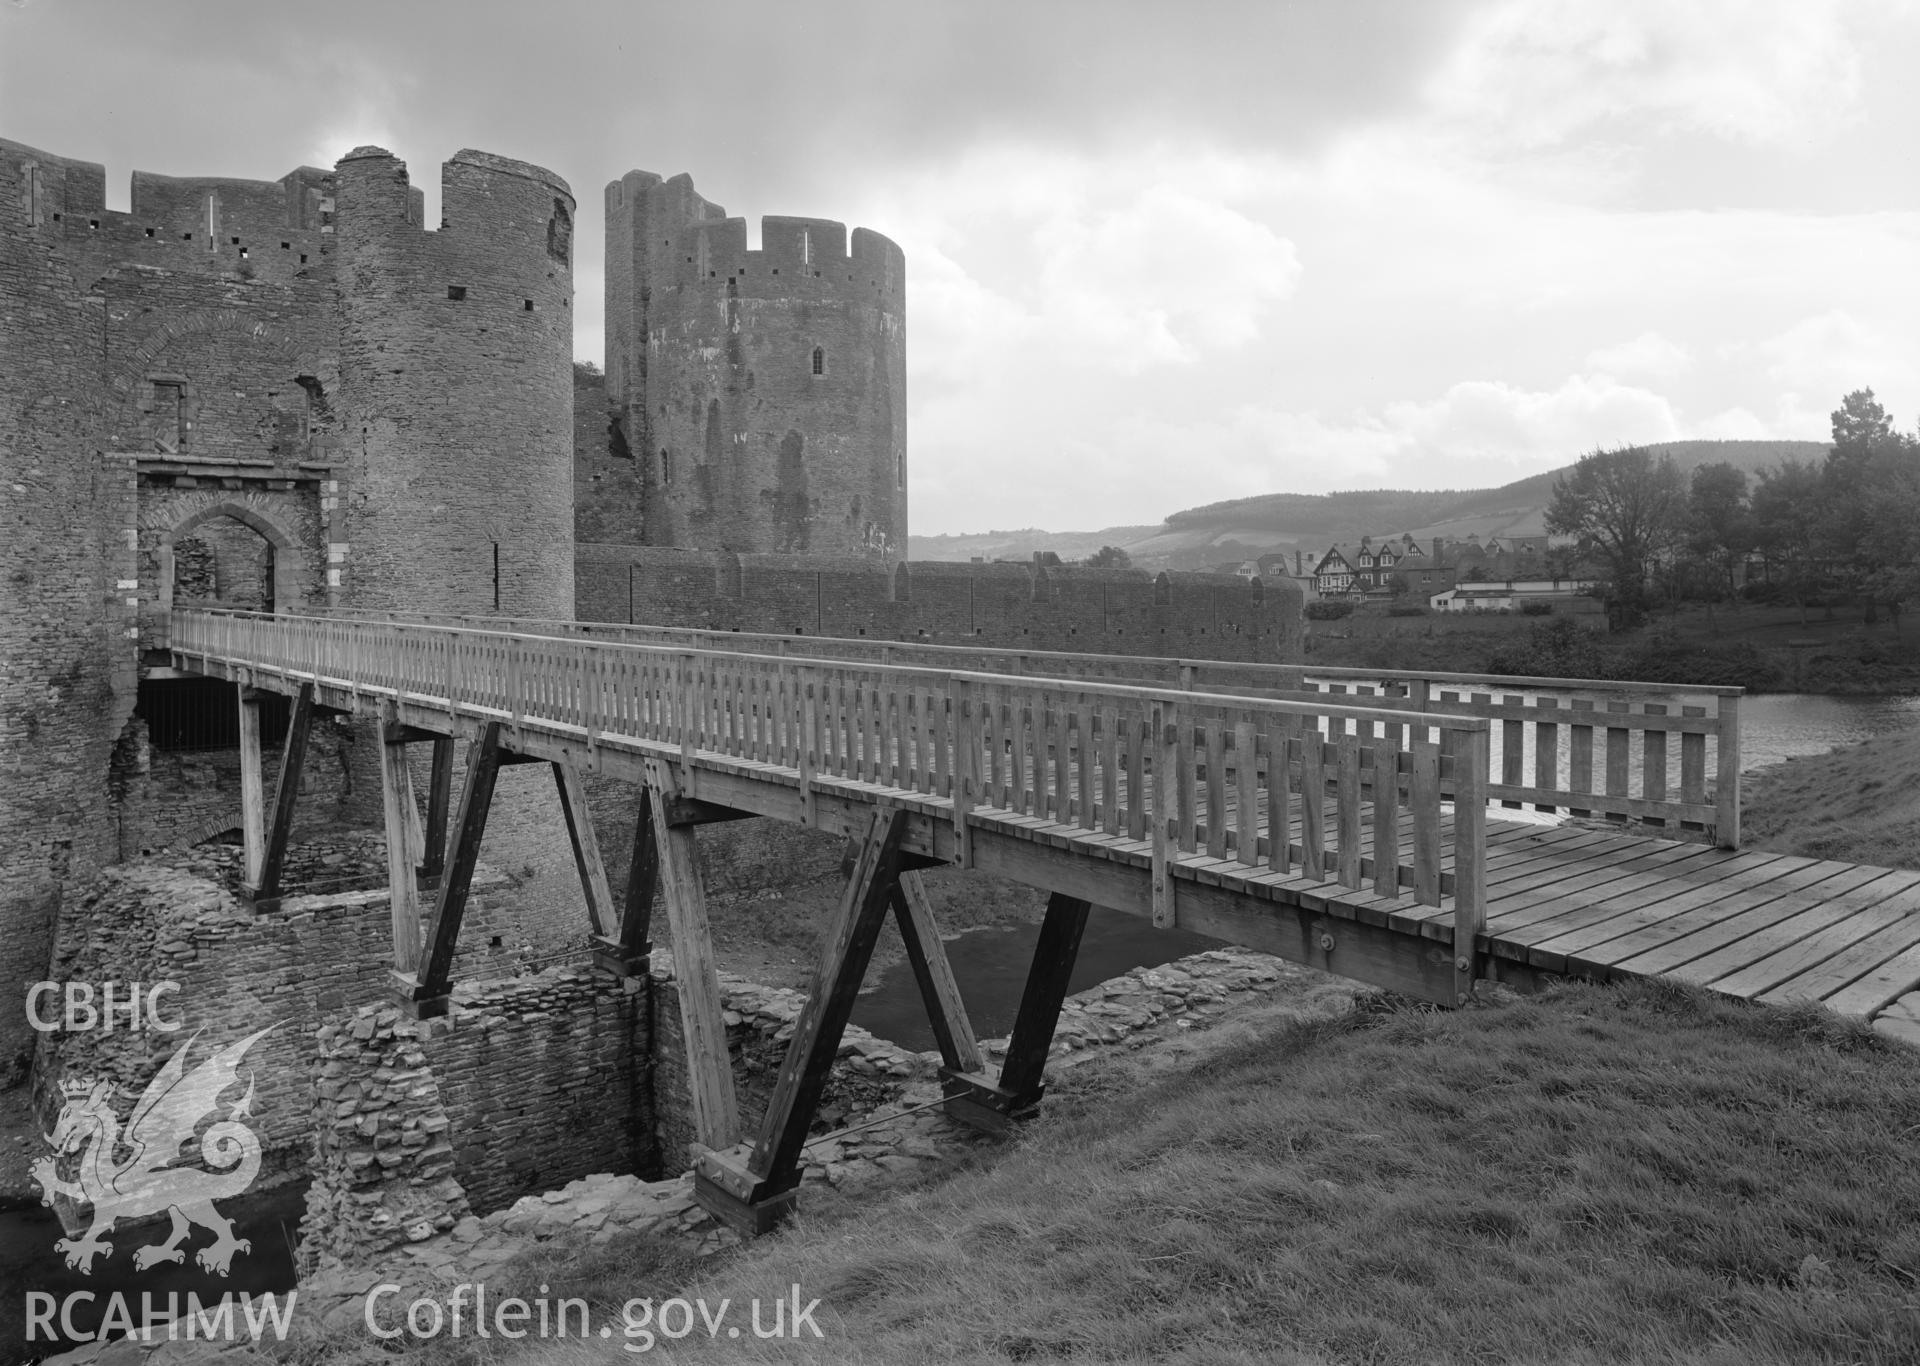 D.O.E photograph of Caerphilly Castle - west gate and bridge from the west.